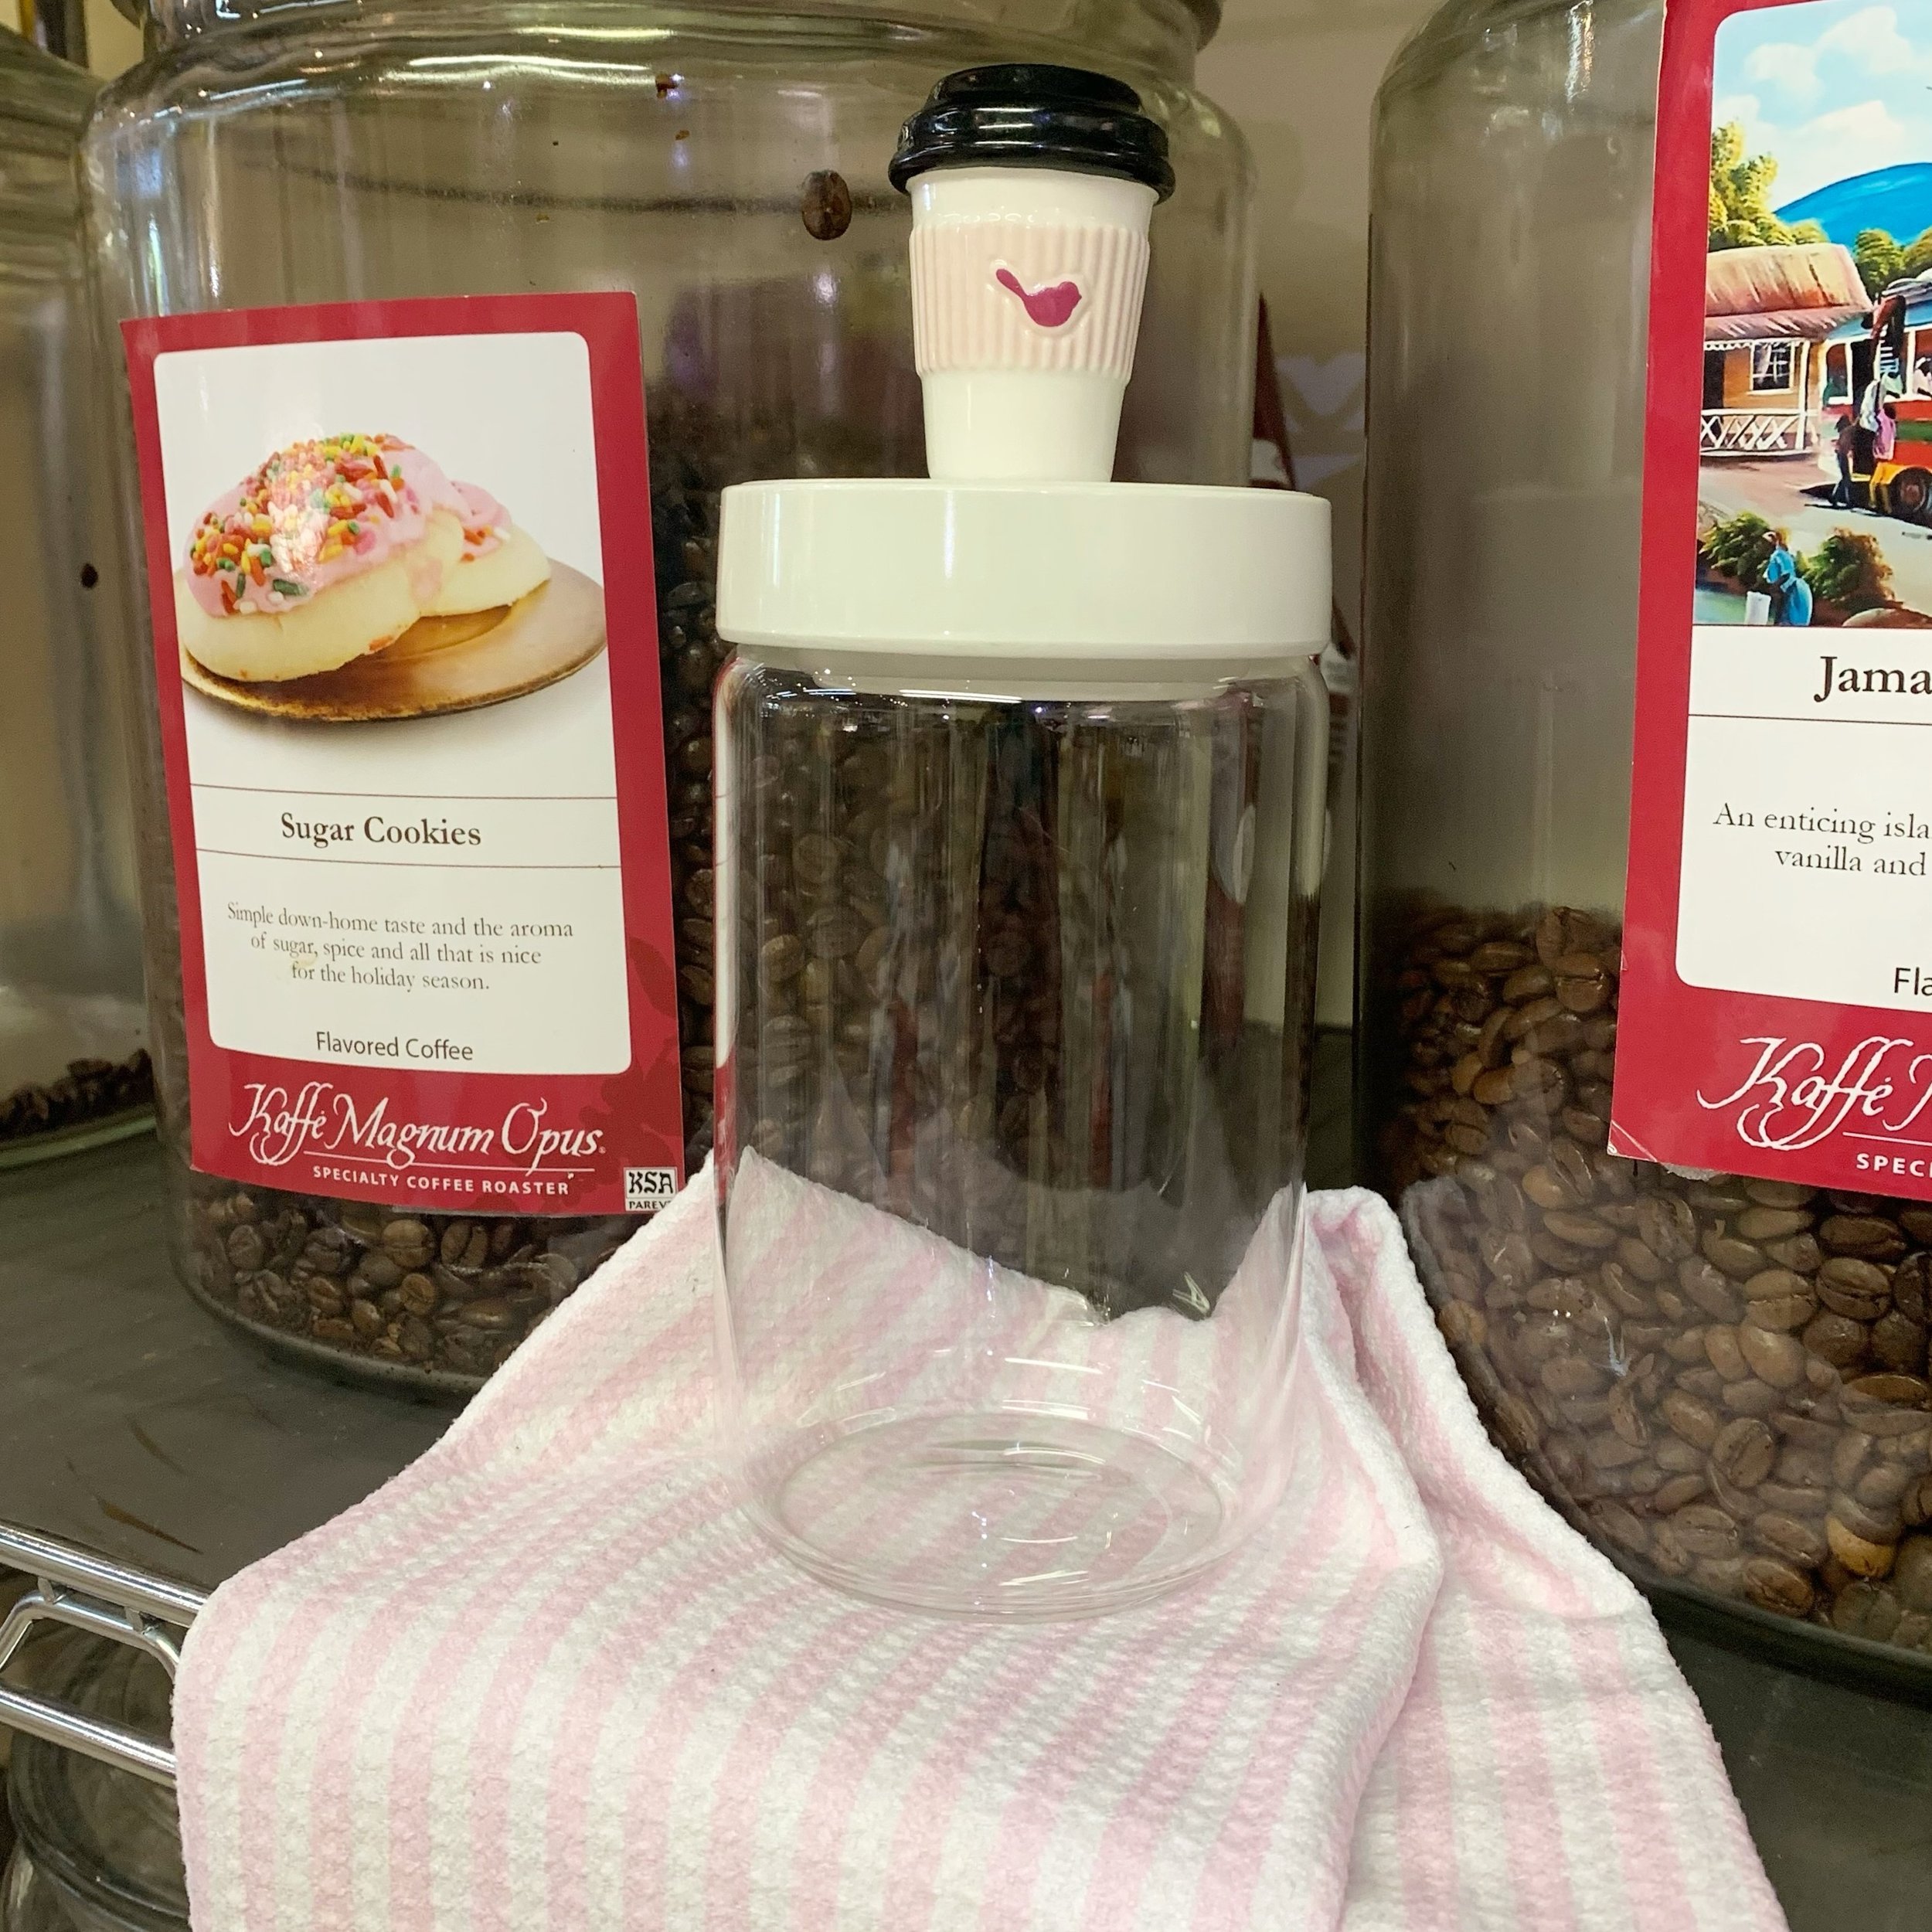 A Nora Fleming canister filled with coffee?! Yes, please! 
What a useful teacher gift! ☕️🍎

Give the best gift, host the best gathering, have the most fun.
🏬Shop in Store: 321 Broadway, Paducah, KY
📞Call to order: 270.534.5951
📲Text a personal sh